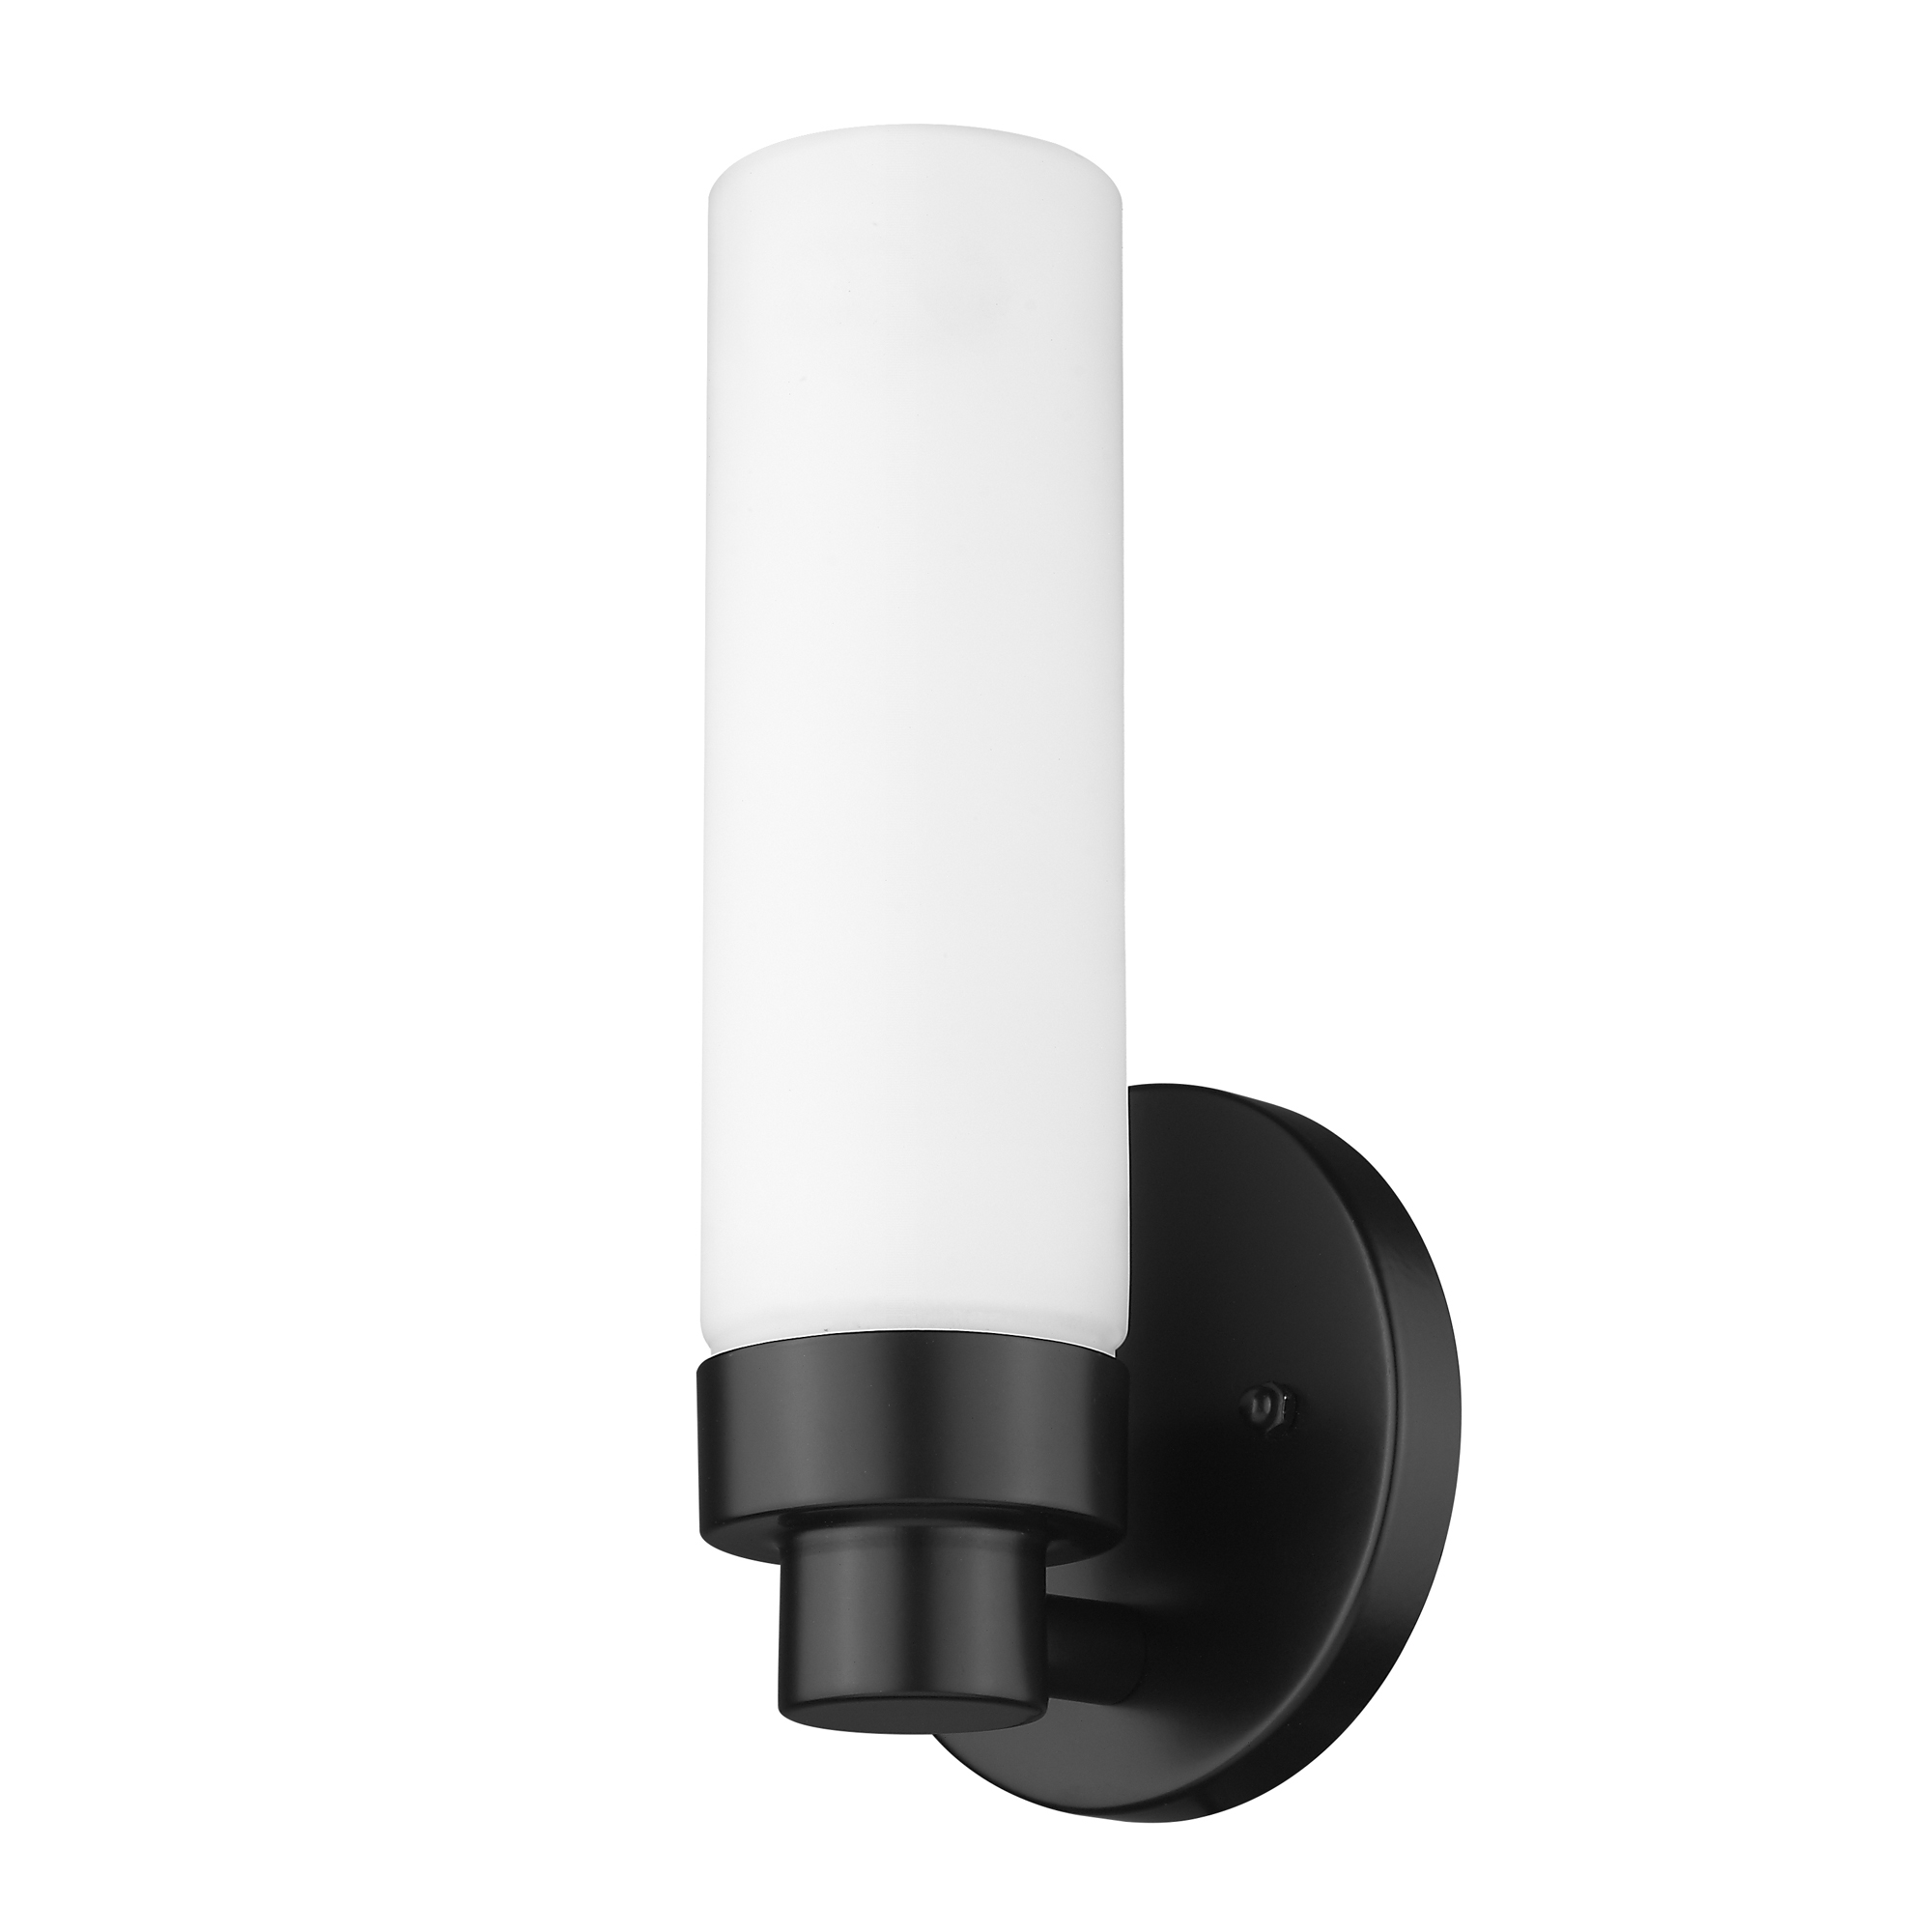 Acclaim Lighting-IN41385BK-Valmont - One Light Wall Sconce - 4.75 Inches Wide by 10 Inches High   Matte Black Finish with Opal Glass